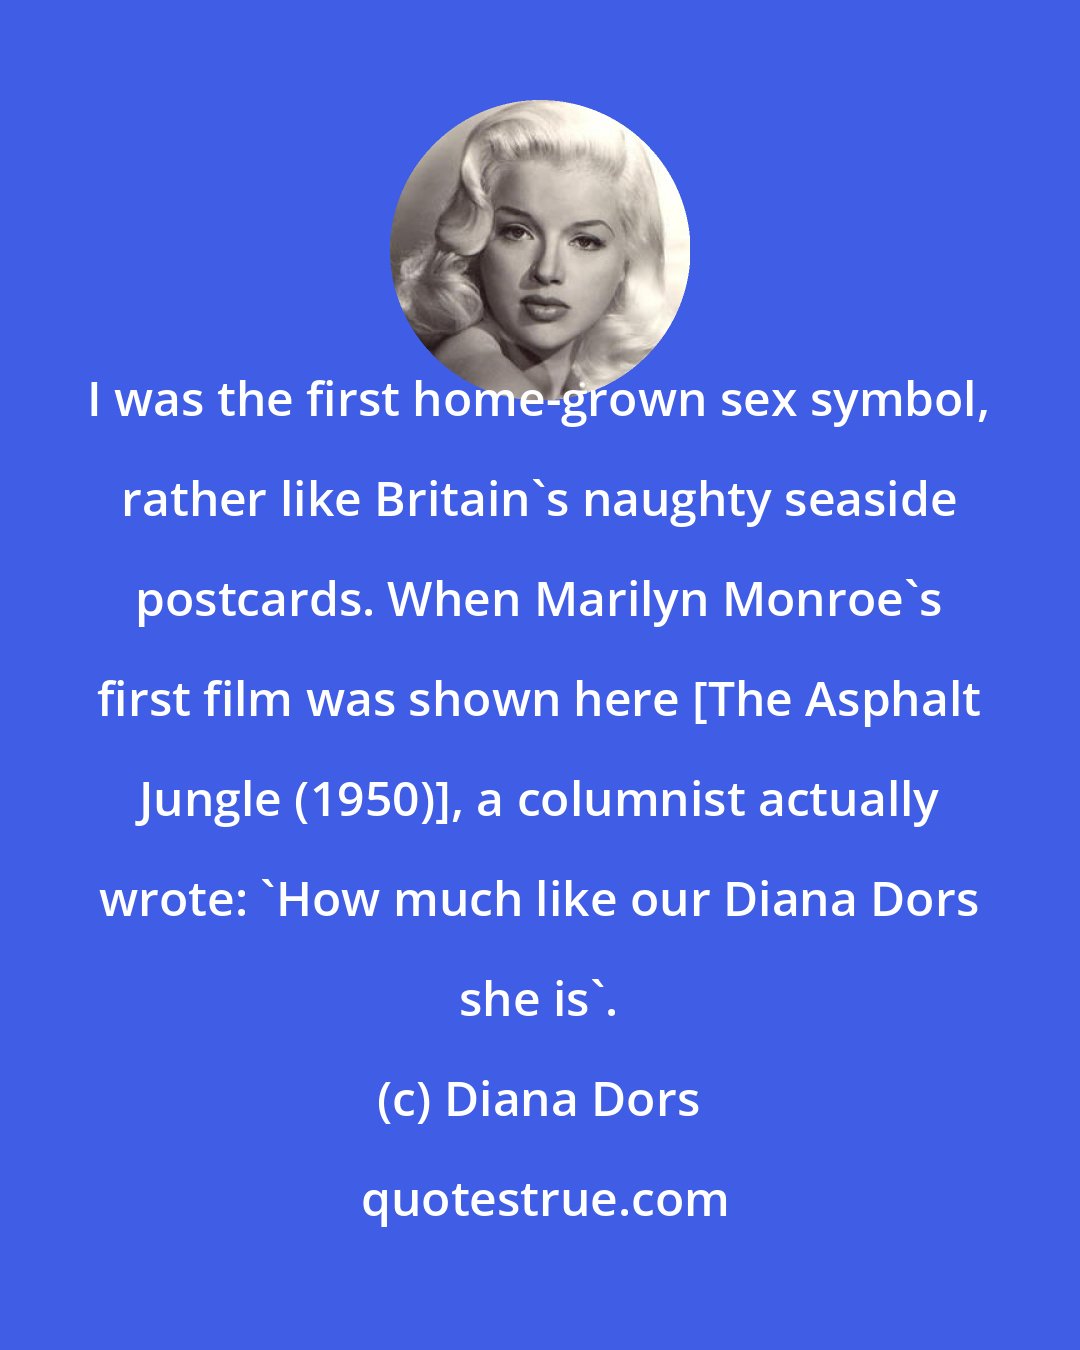 Diana Dors: I was the first home-grown sex symbol, rather like Britain`s naughty seaside postcards. When Marilyn Monroe`s first film was shown here [The Asphalt Jungle (1950)], a columnist actually wrote: `How much like our Diana Dors she is`.